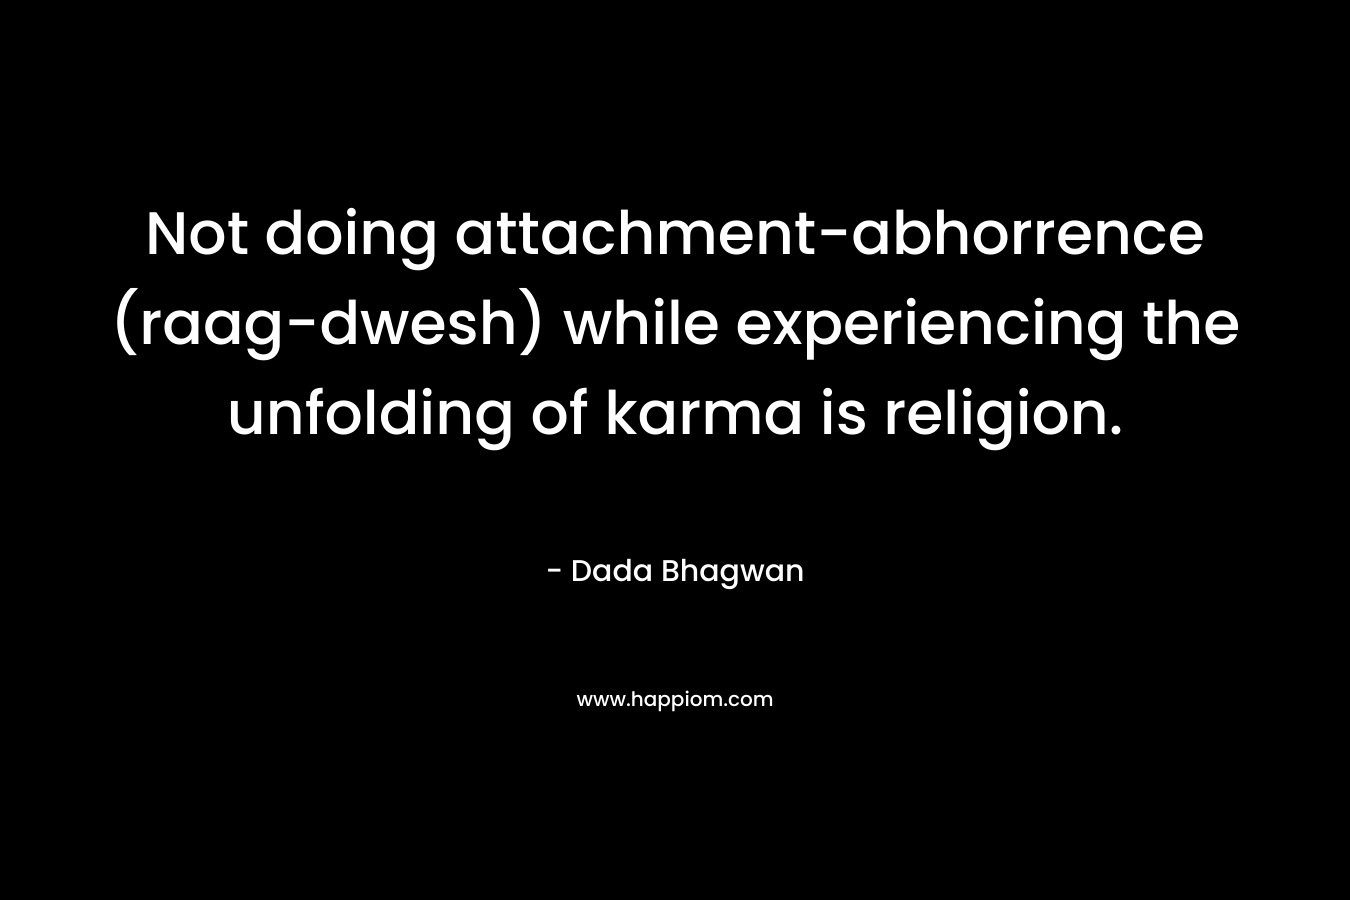 Not doing attachment-abhorrence (raag-dwesh) while experiencing the unfolding of karma is religion.